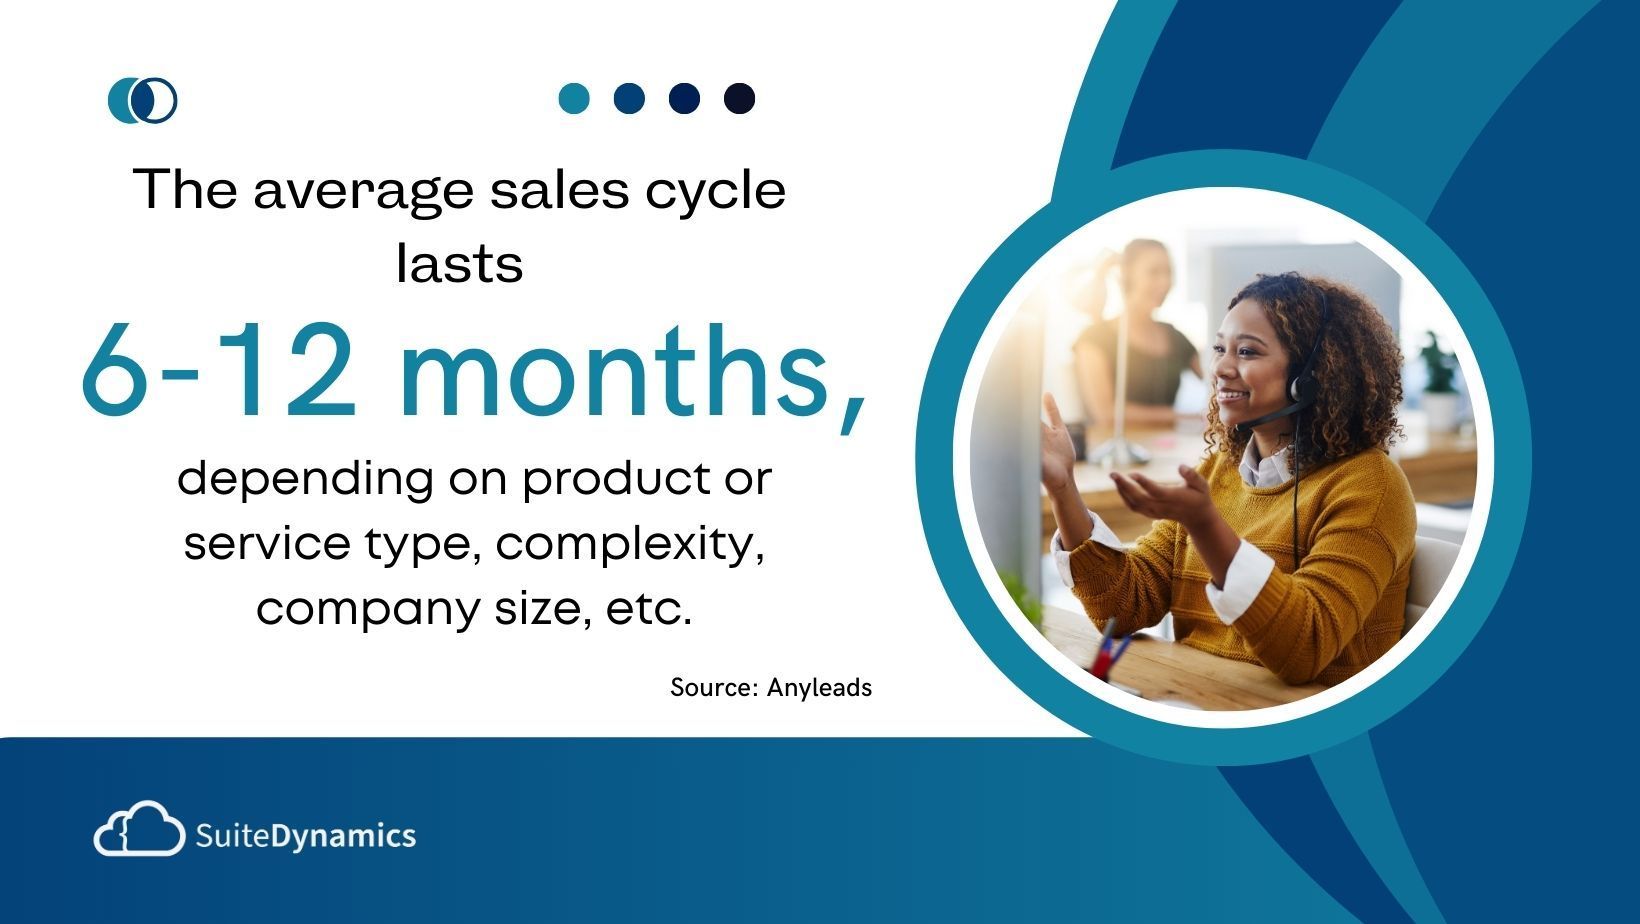 Graphic stating the average sales cycle lasts 6-12 months, depending on product or service type, complexity, company size, etc.